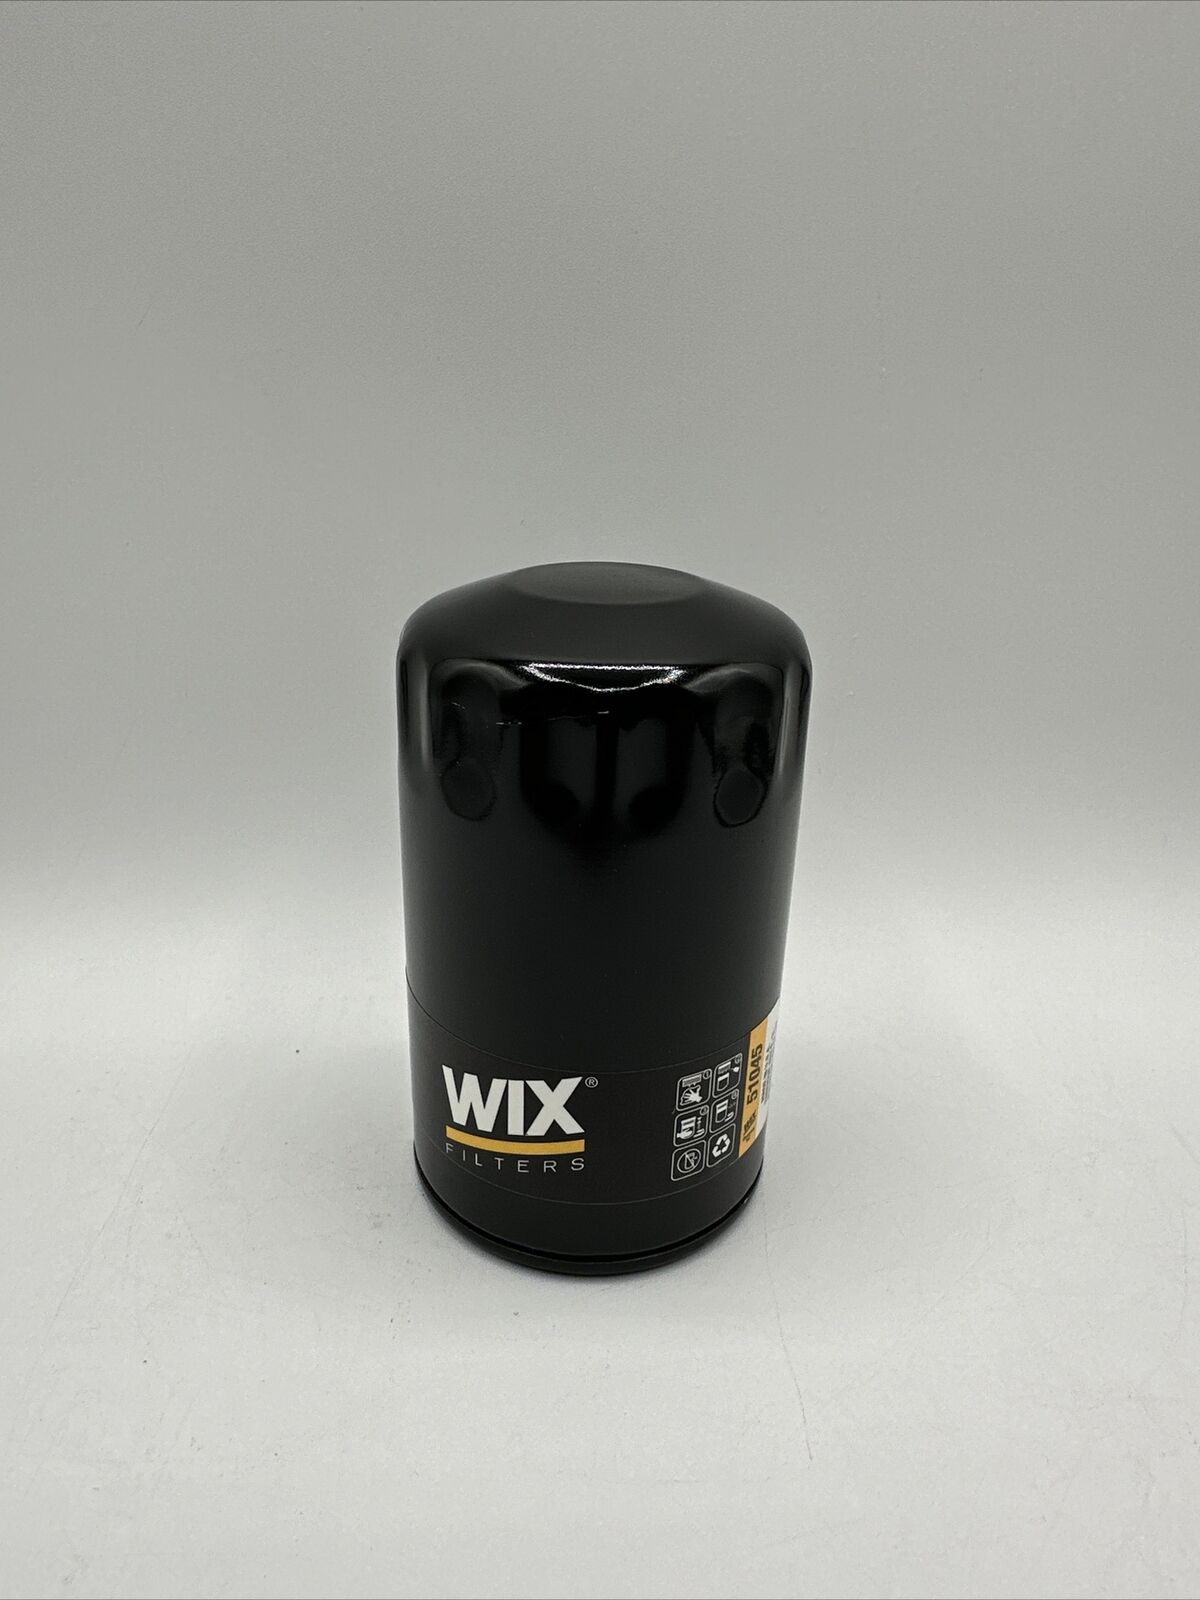 New Wix 51045 Engine Oil Filter, Free Shipping!